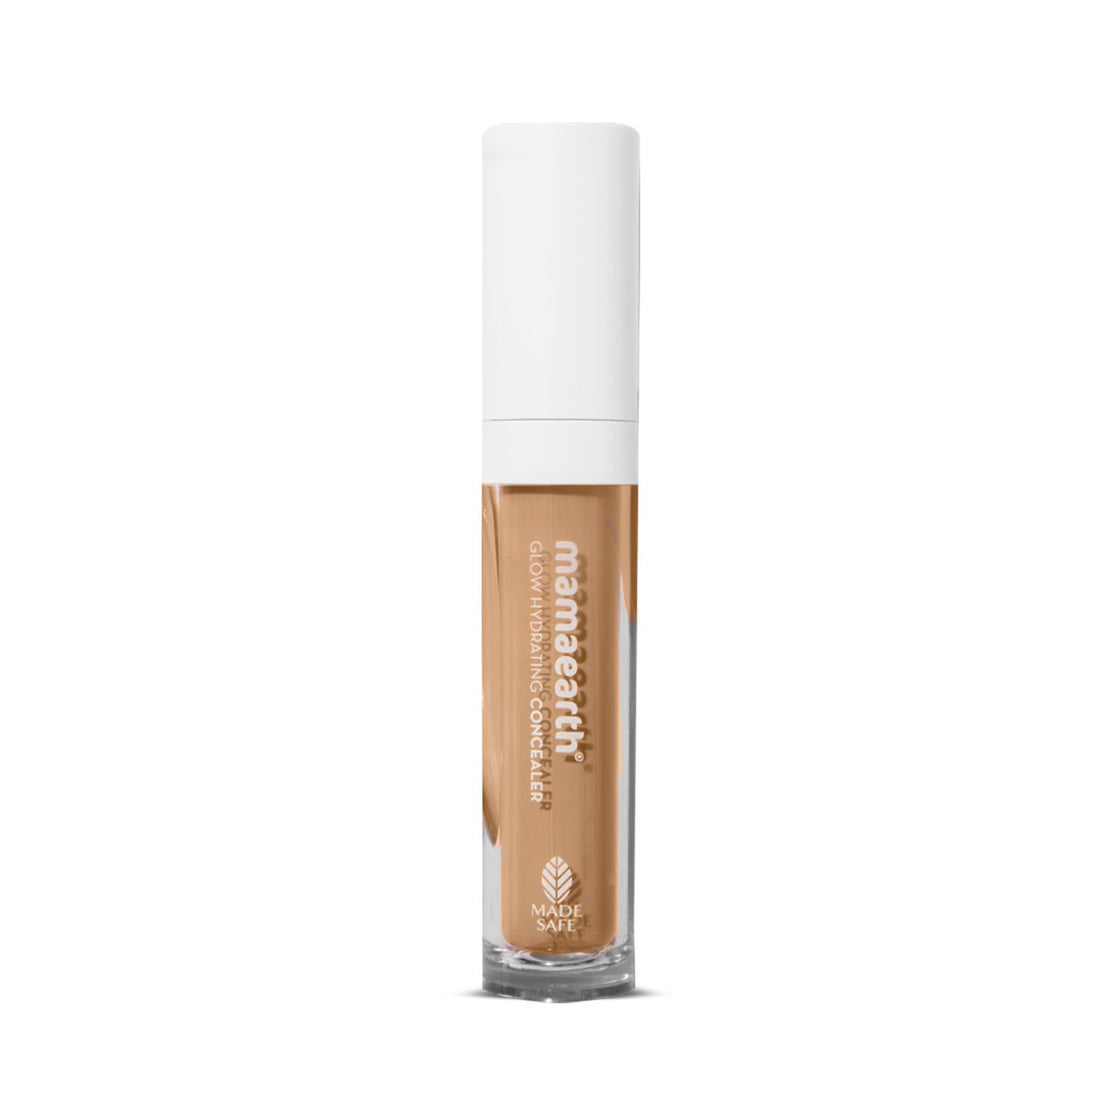 Mamaearth Glow Hydrating Concealer With Vitamin C & Turmeric For 100% Spot Coverage